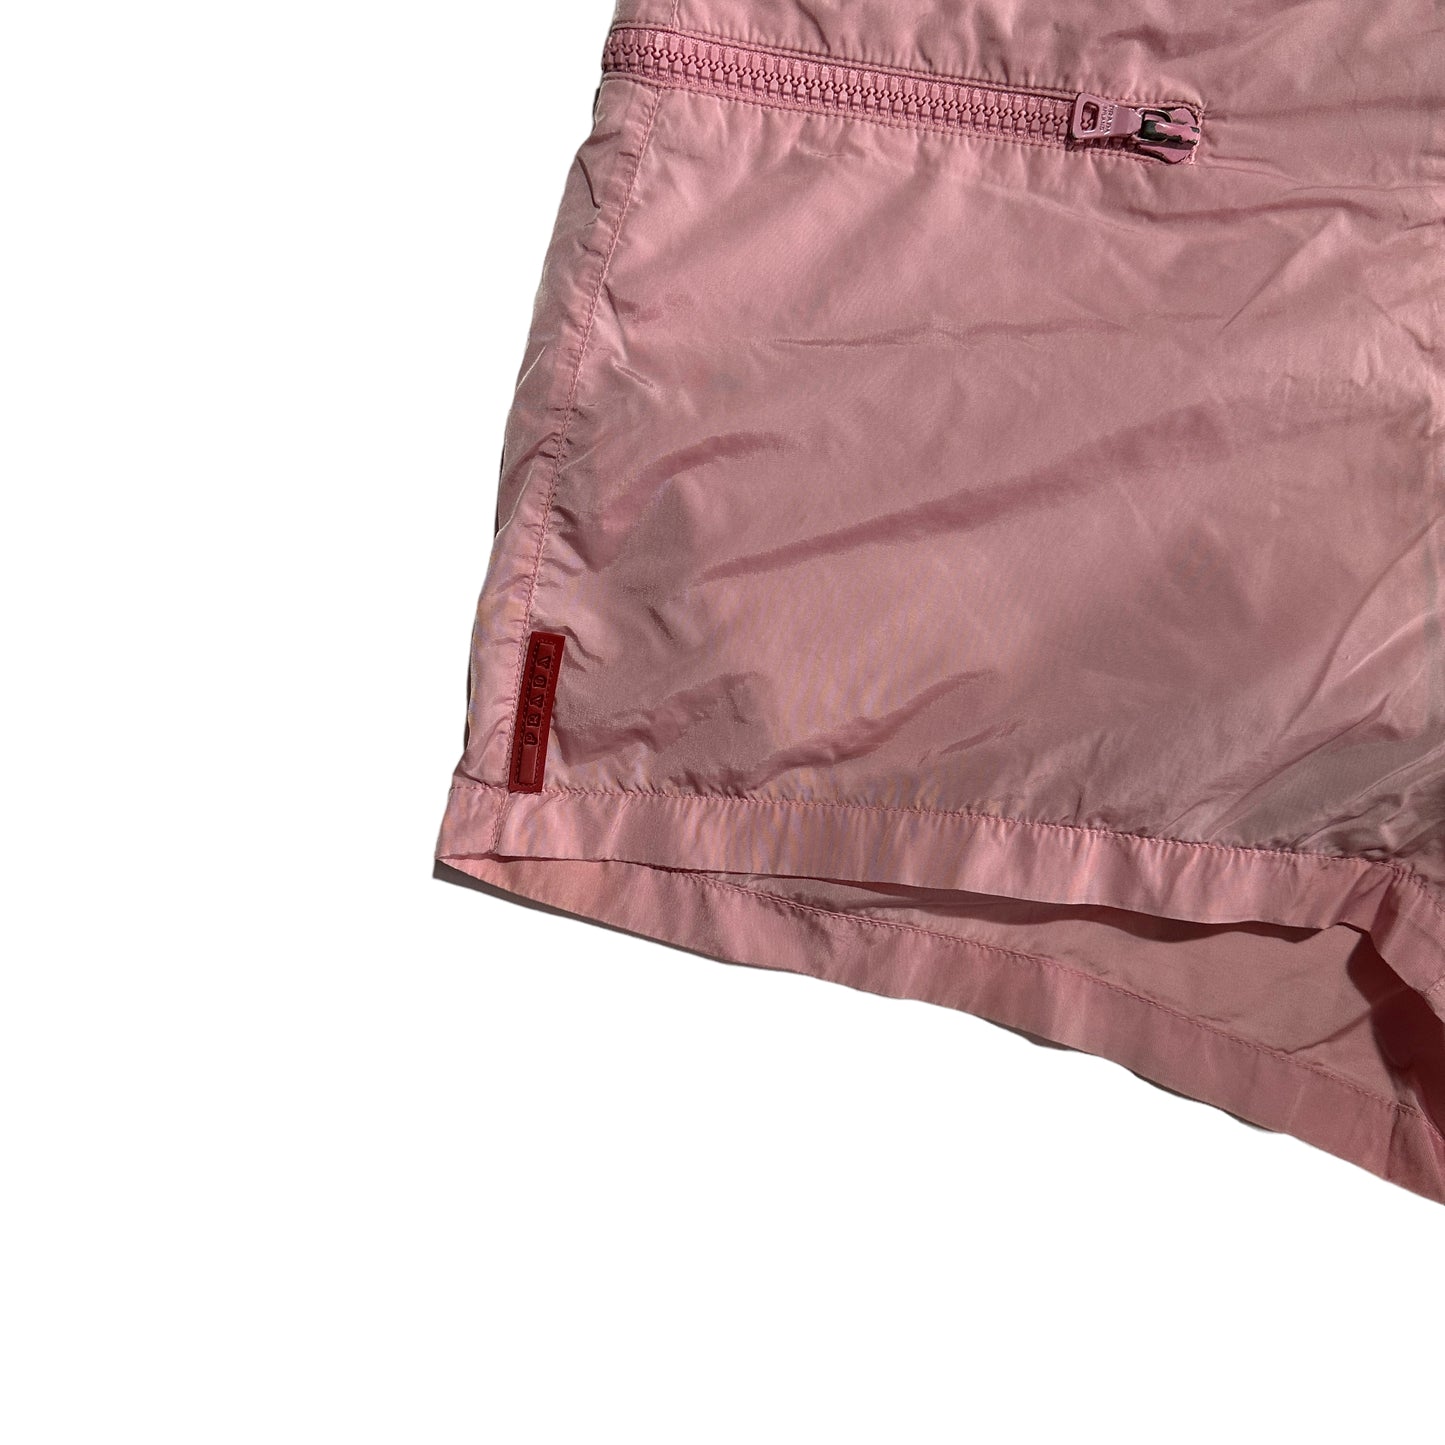 S/S 2000 Pink Shorts (40W)